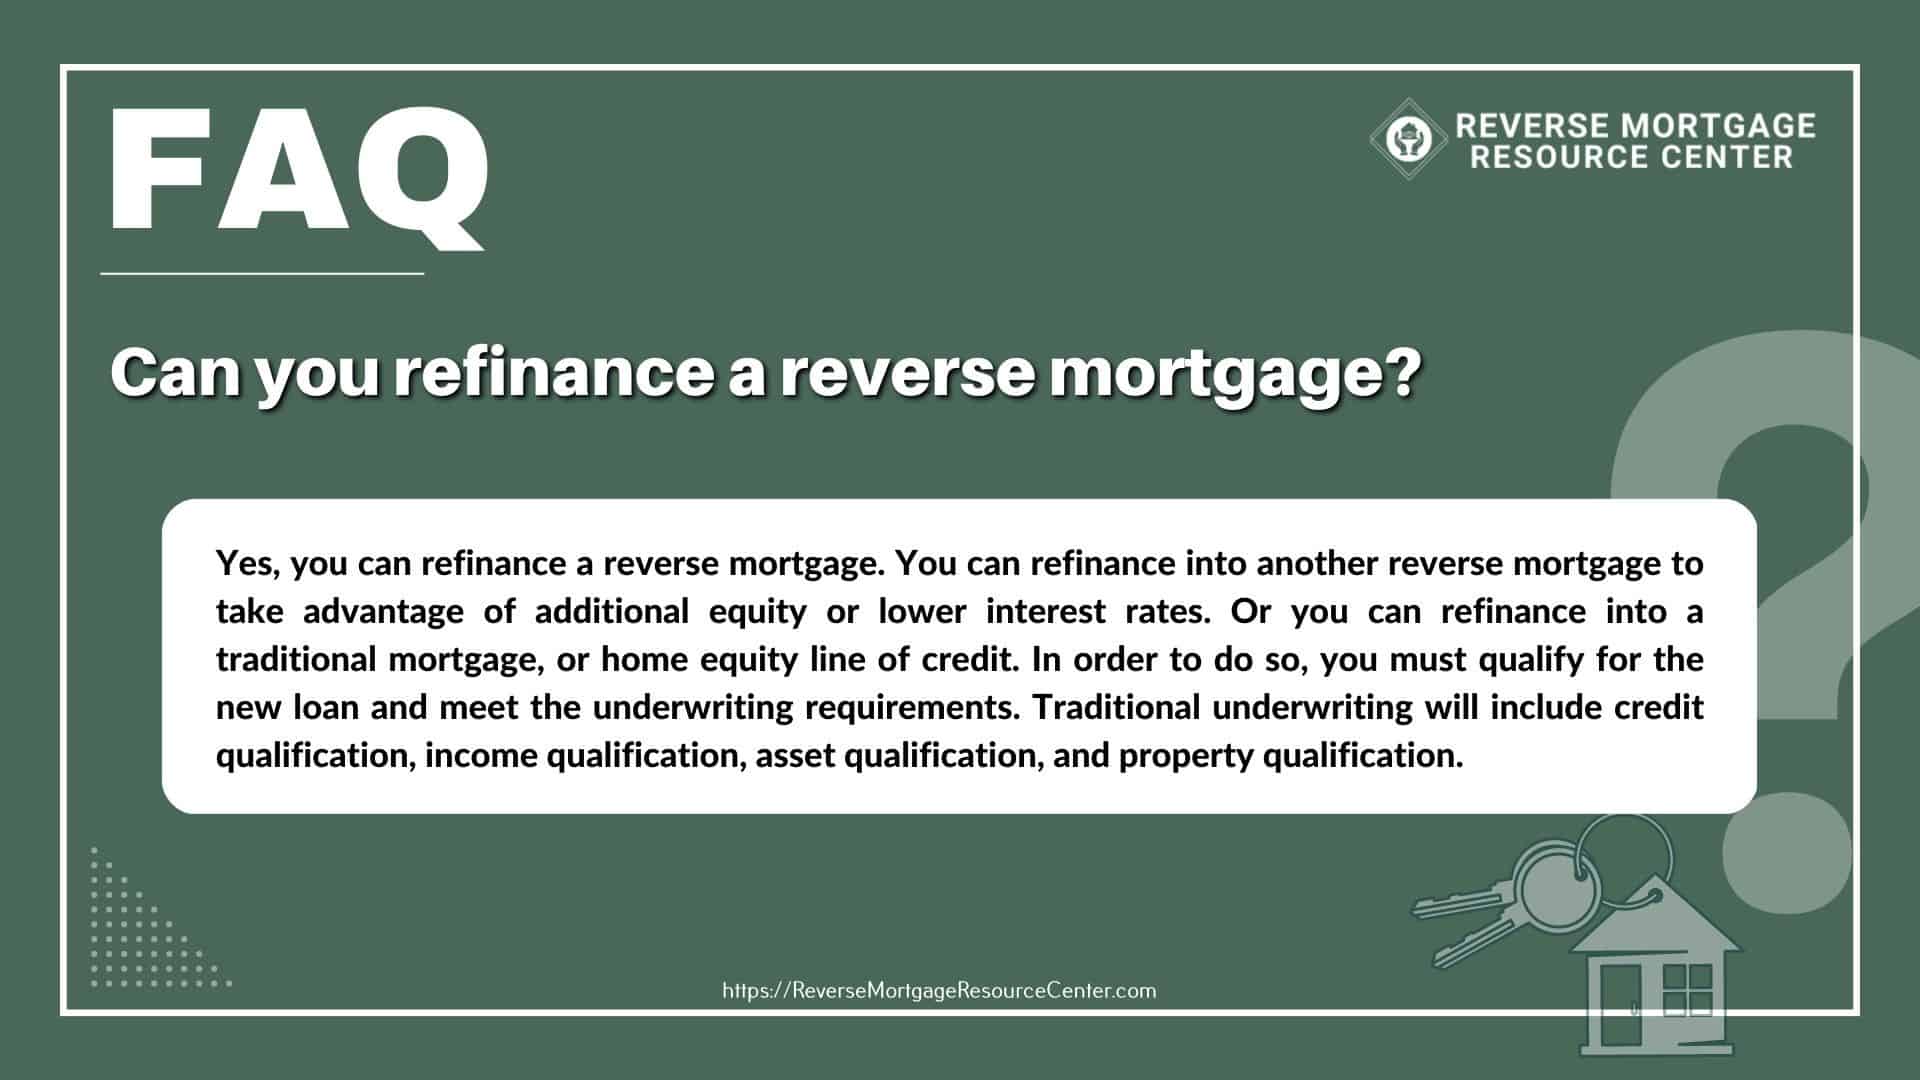 Can you refinance a reverse mortgage?